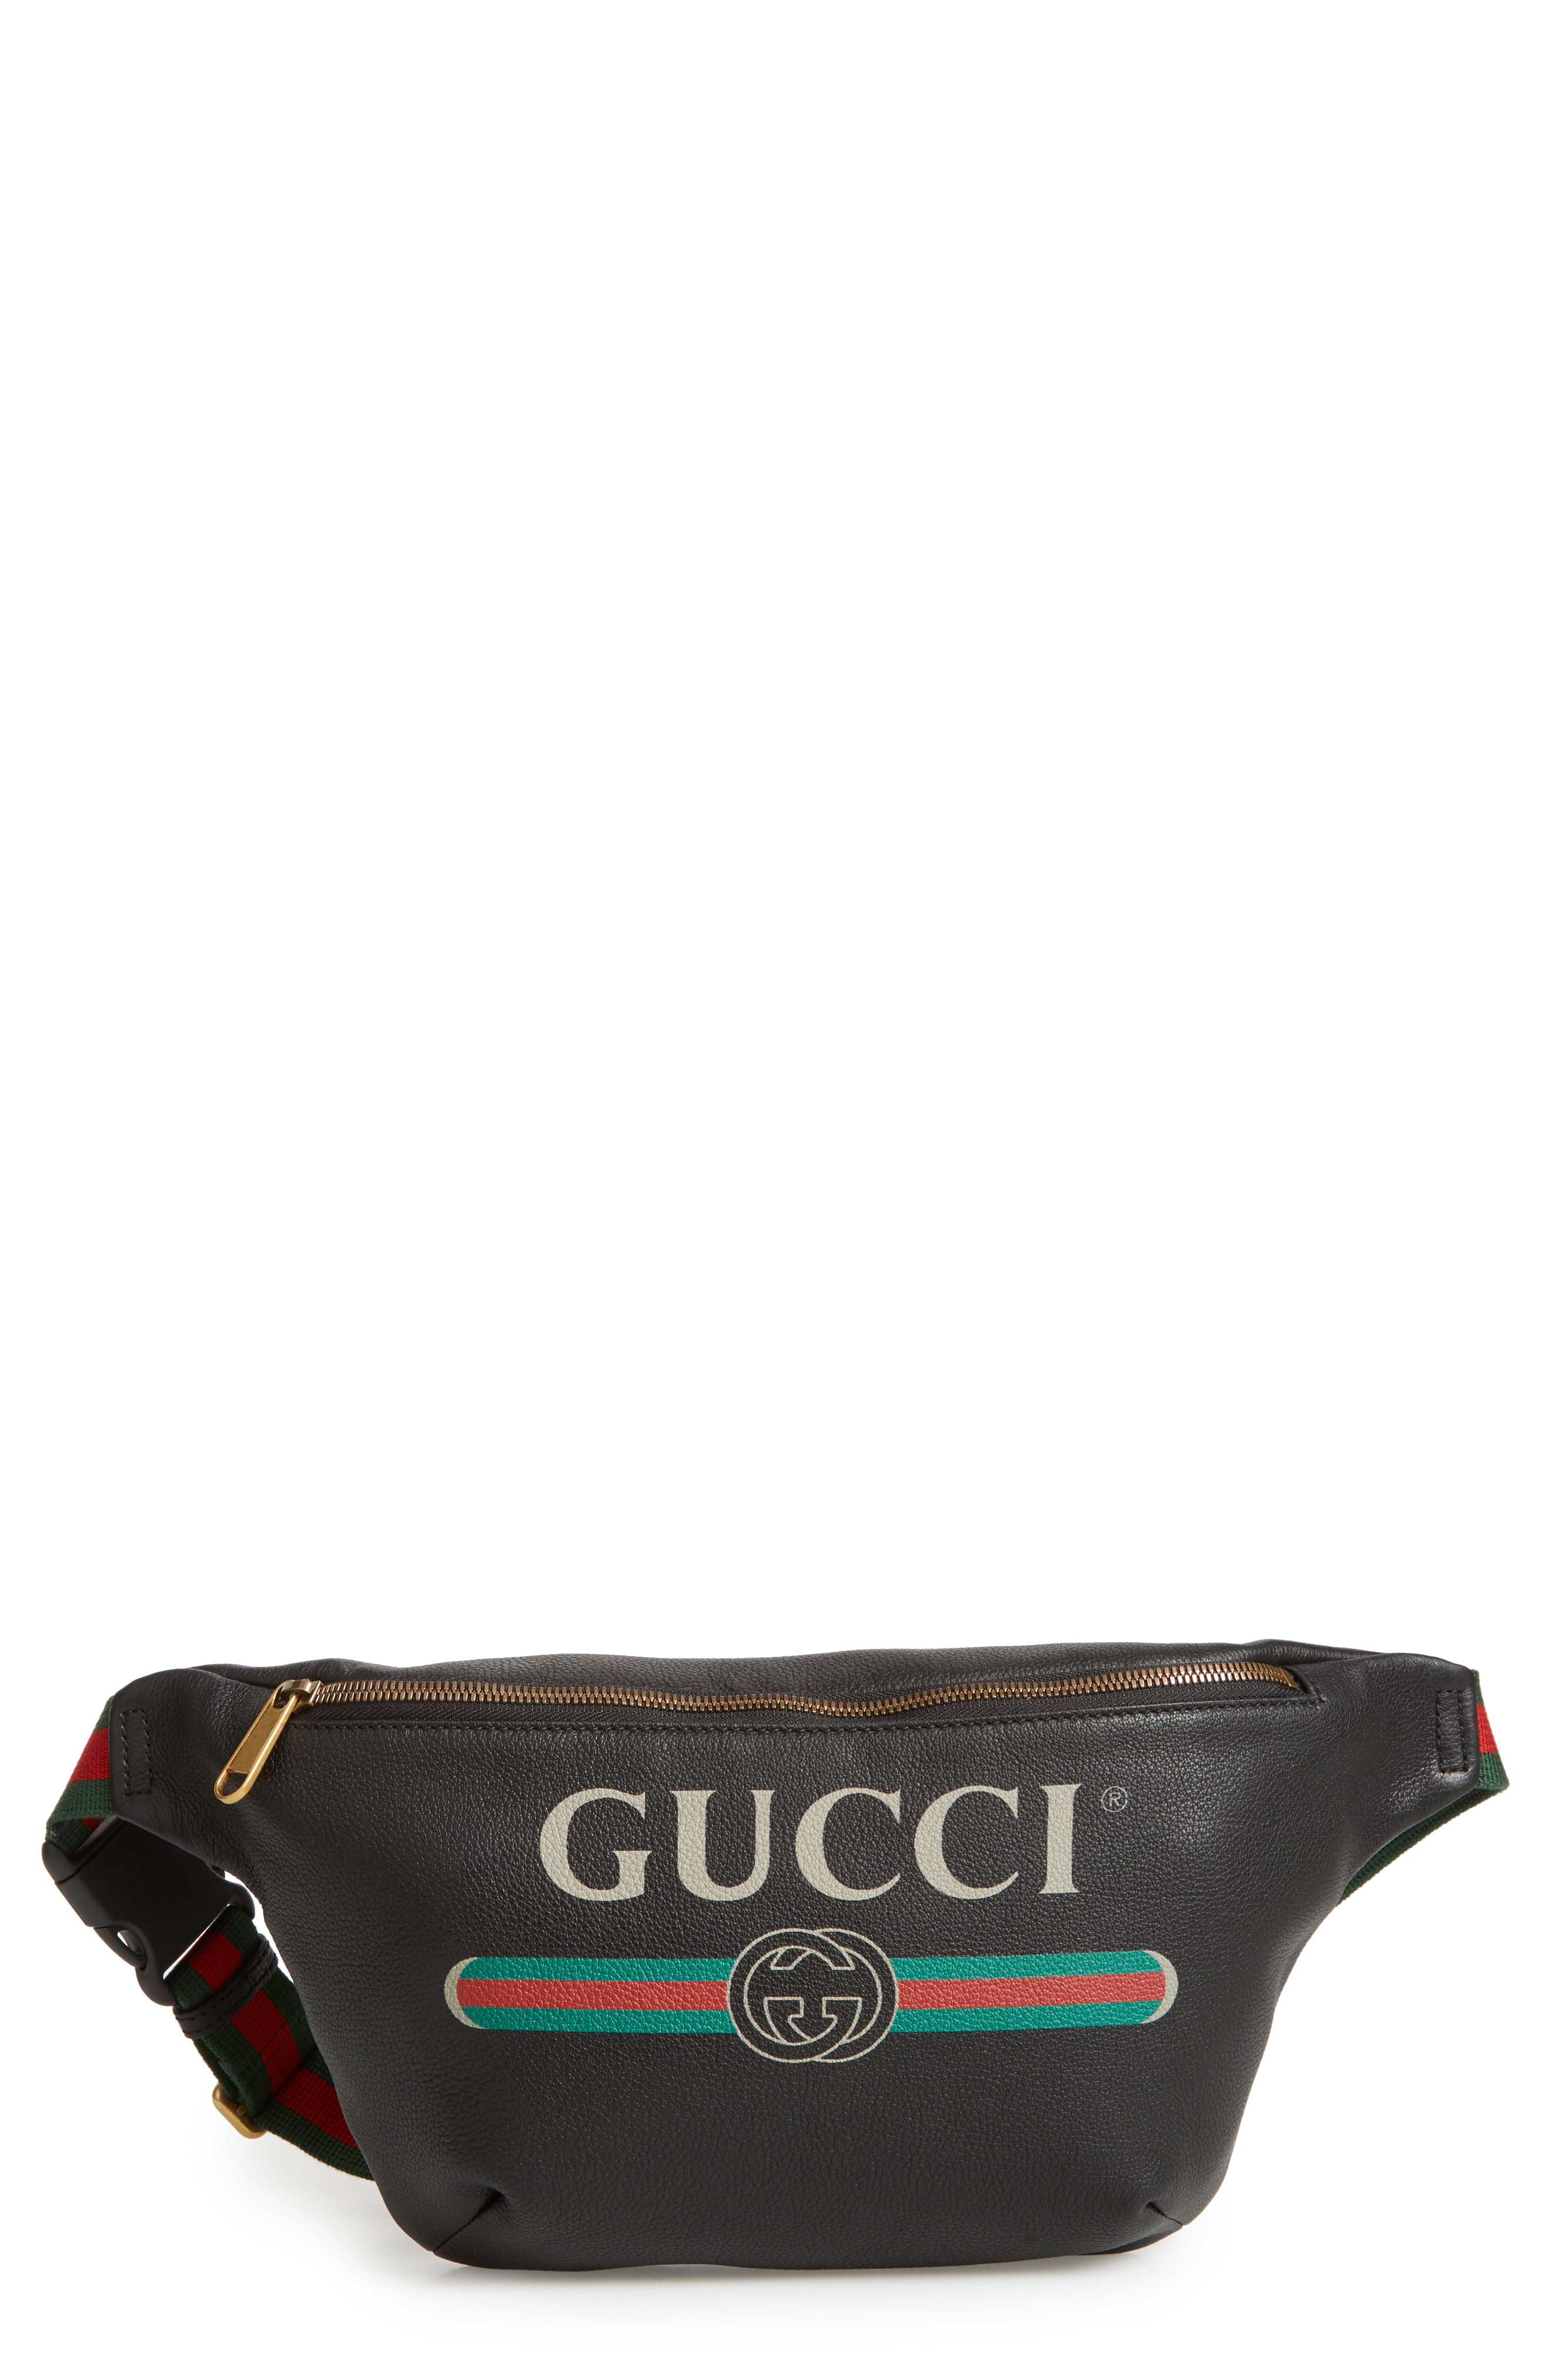 gucci leather fanny pack